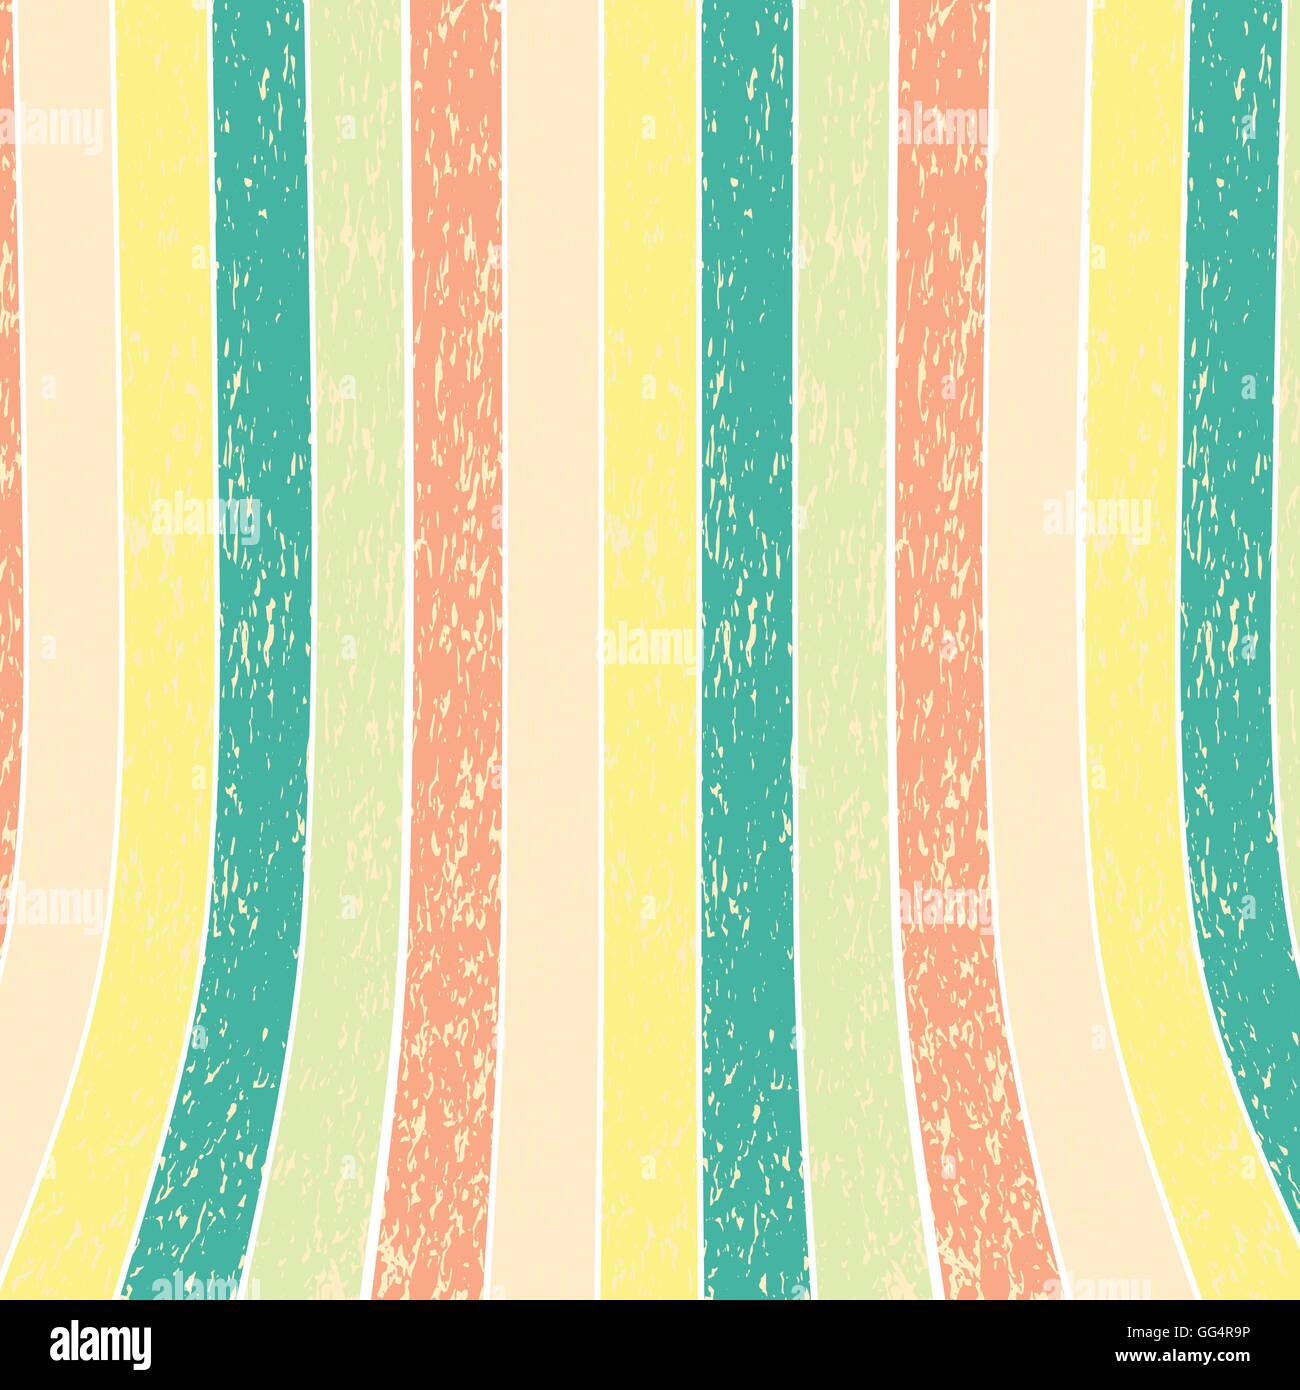 Old pastel wooden curve board, stock vector Stock Vector